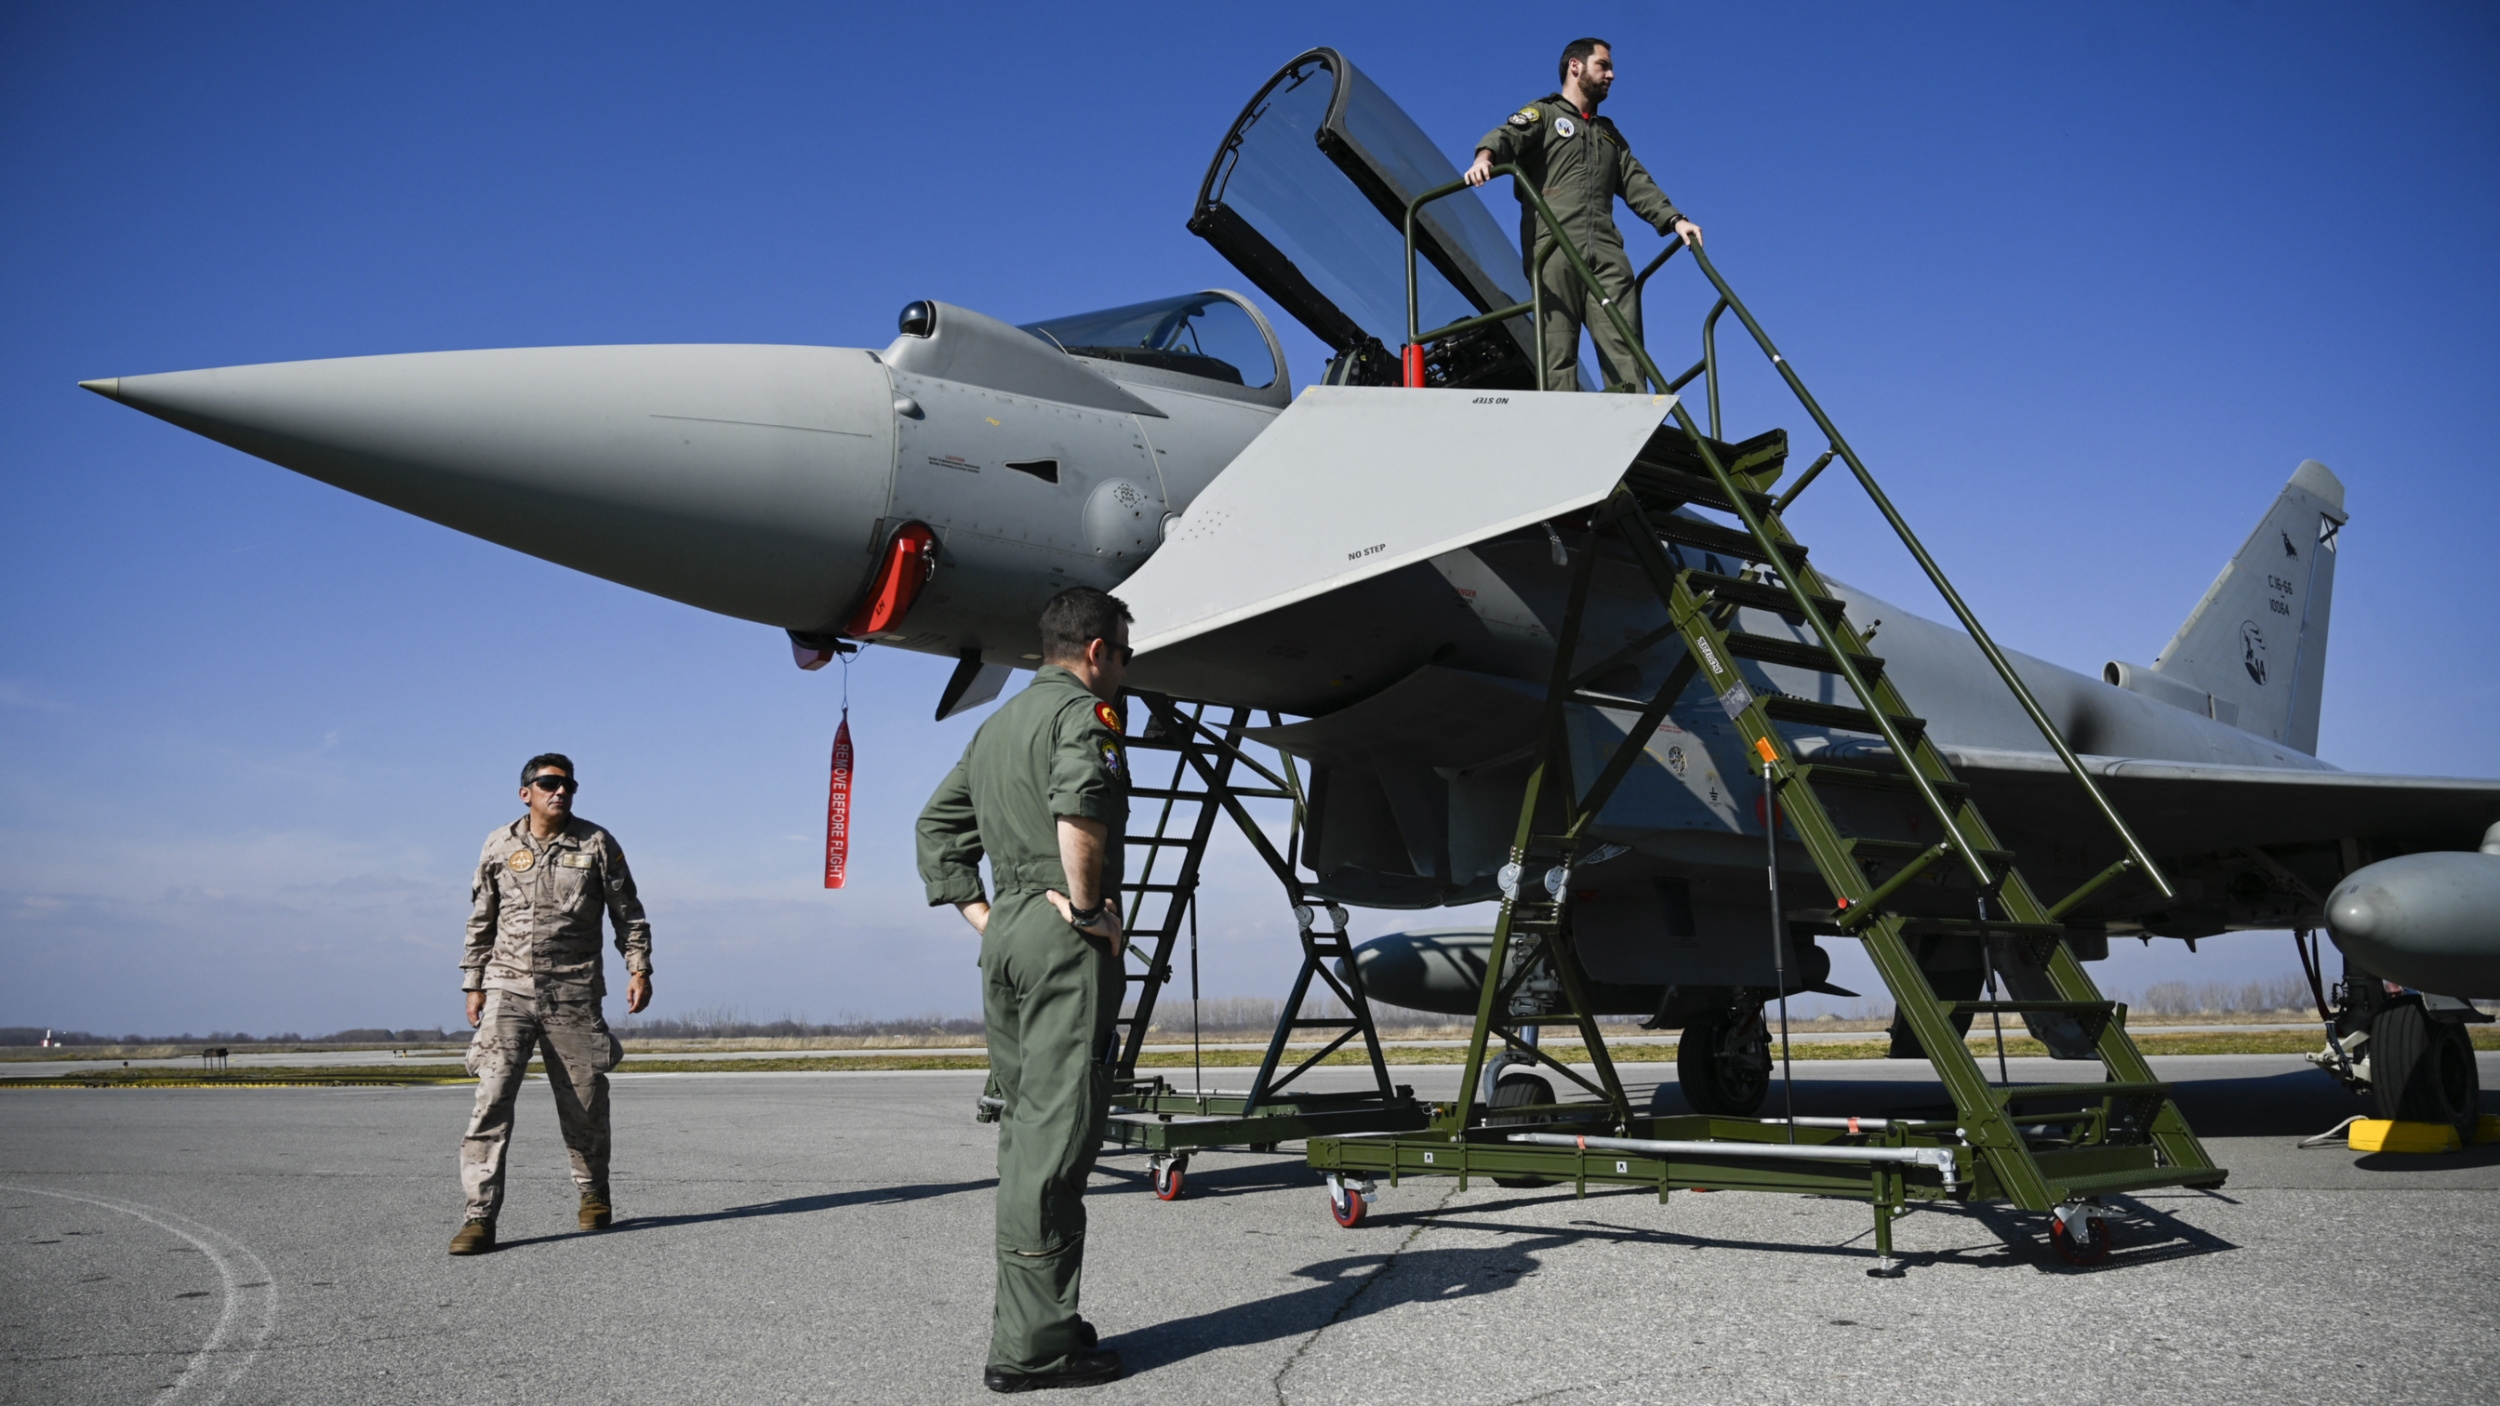 Spanish pilots stand next to a Spanish Eurofighter EF-2000 Typhoon II aircraft at Graf Ignatievo airbase on 17 February 2022 (AFP)